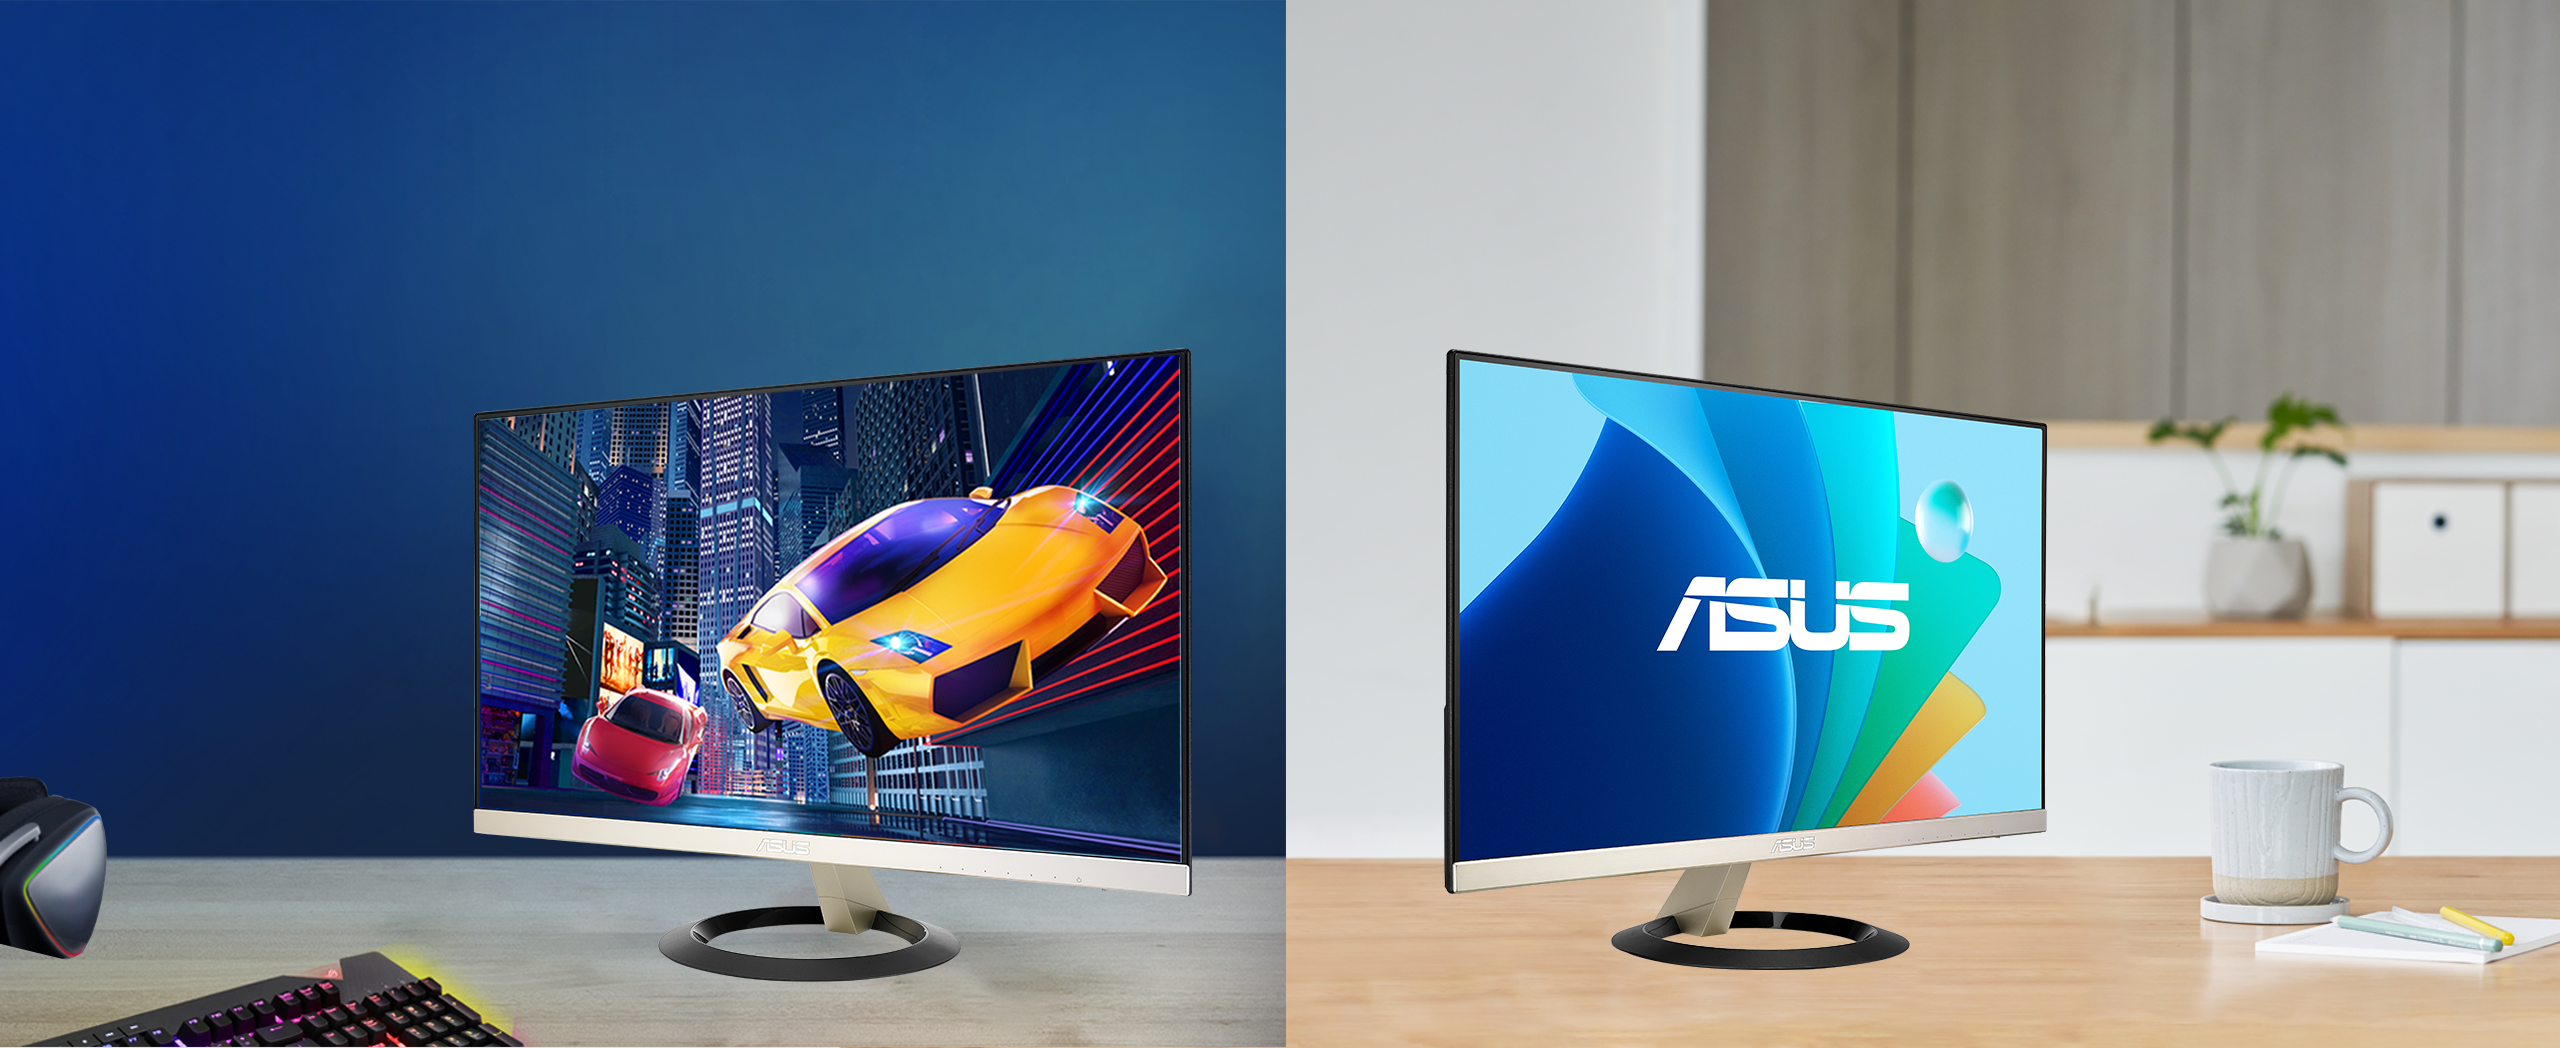 ASUS VZ249HFA-G is 23.8-inch IPS Eye Care Gaming monitor with fast 100Hz refresh rate and Adaptive-Sync technology to eliminate screen tearing and choppy frame rates for the smoother-than-ever experience.